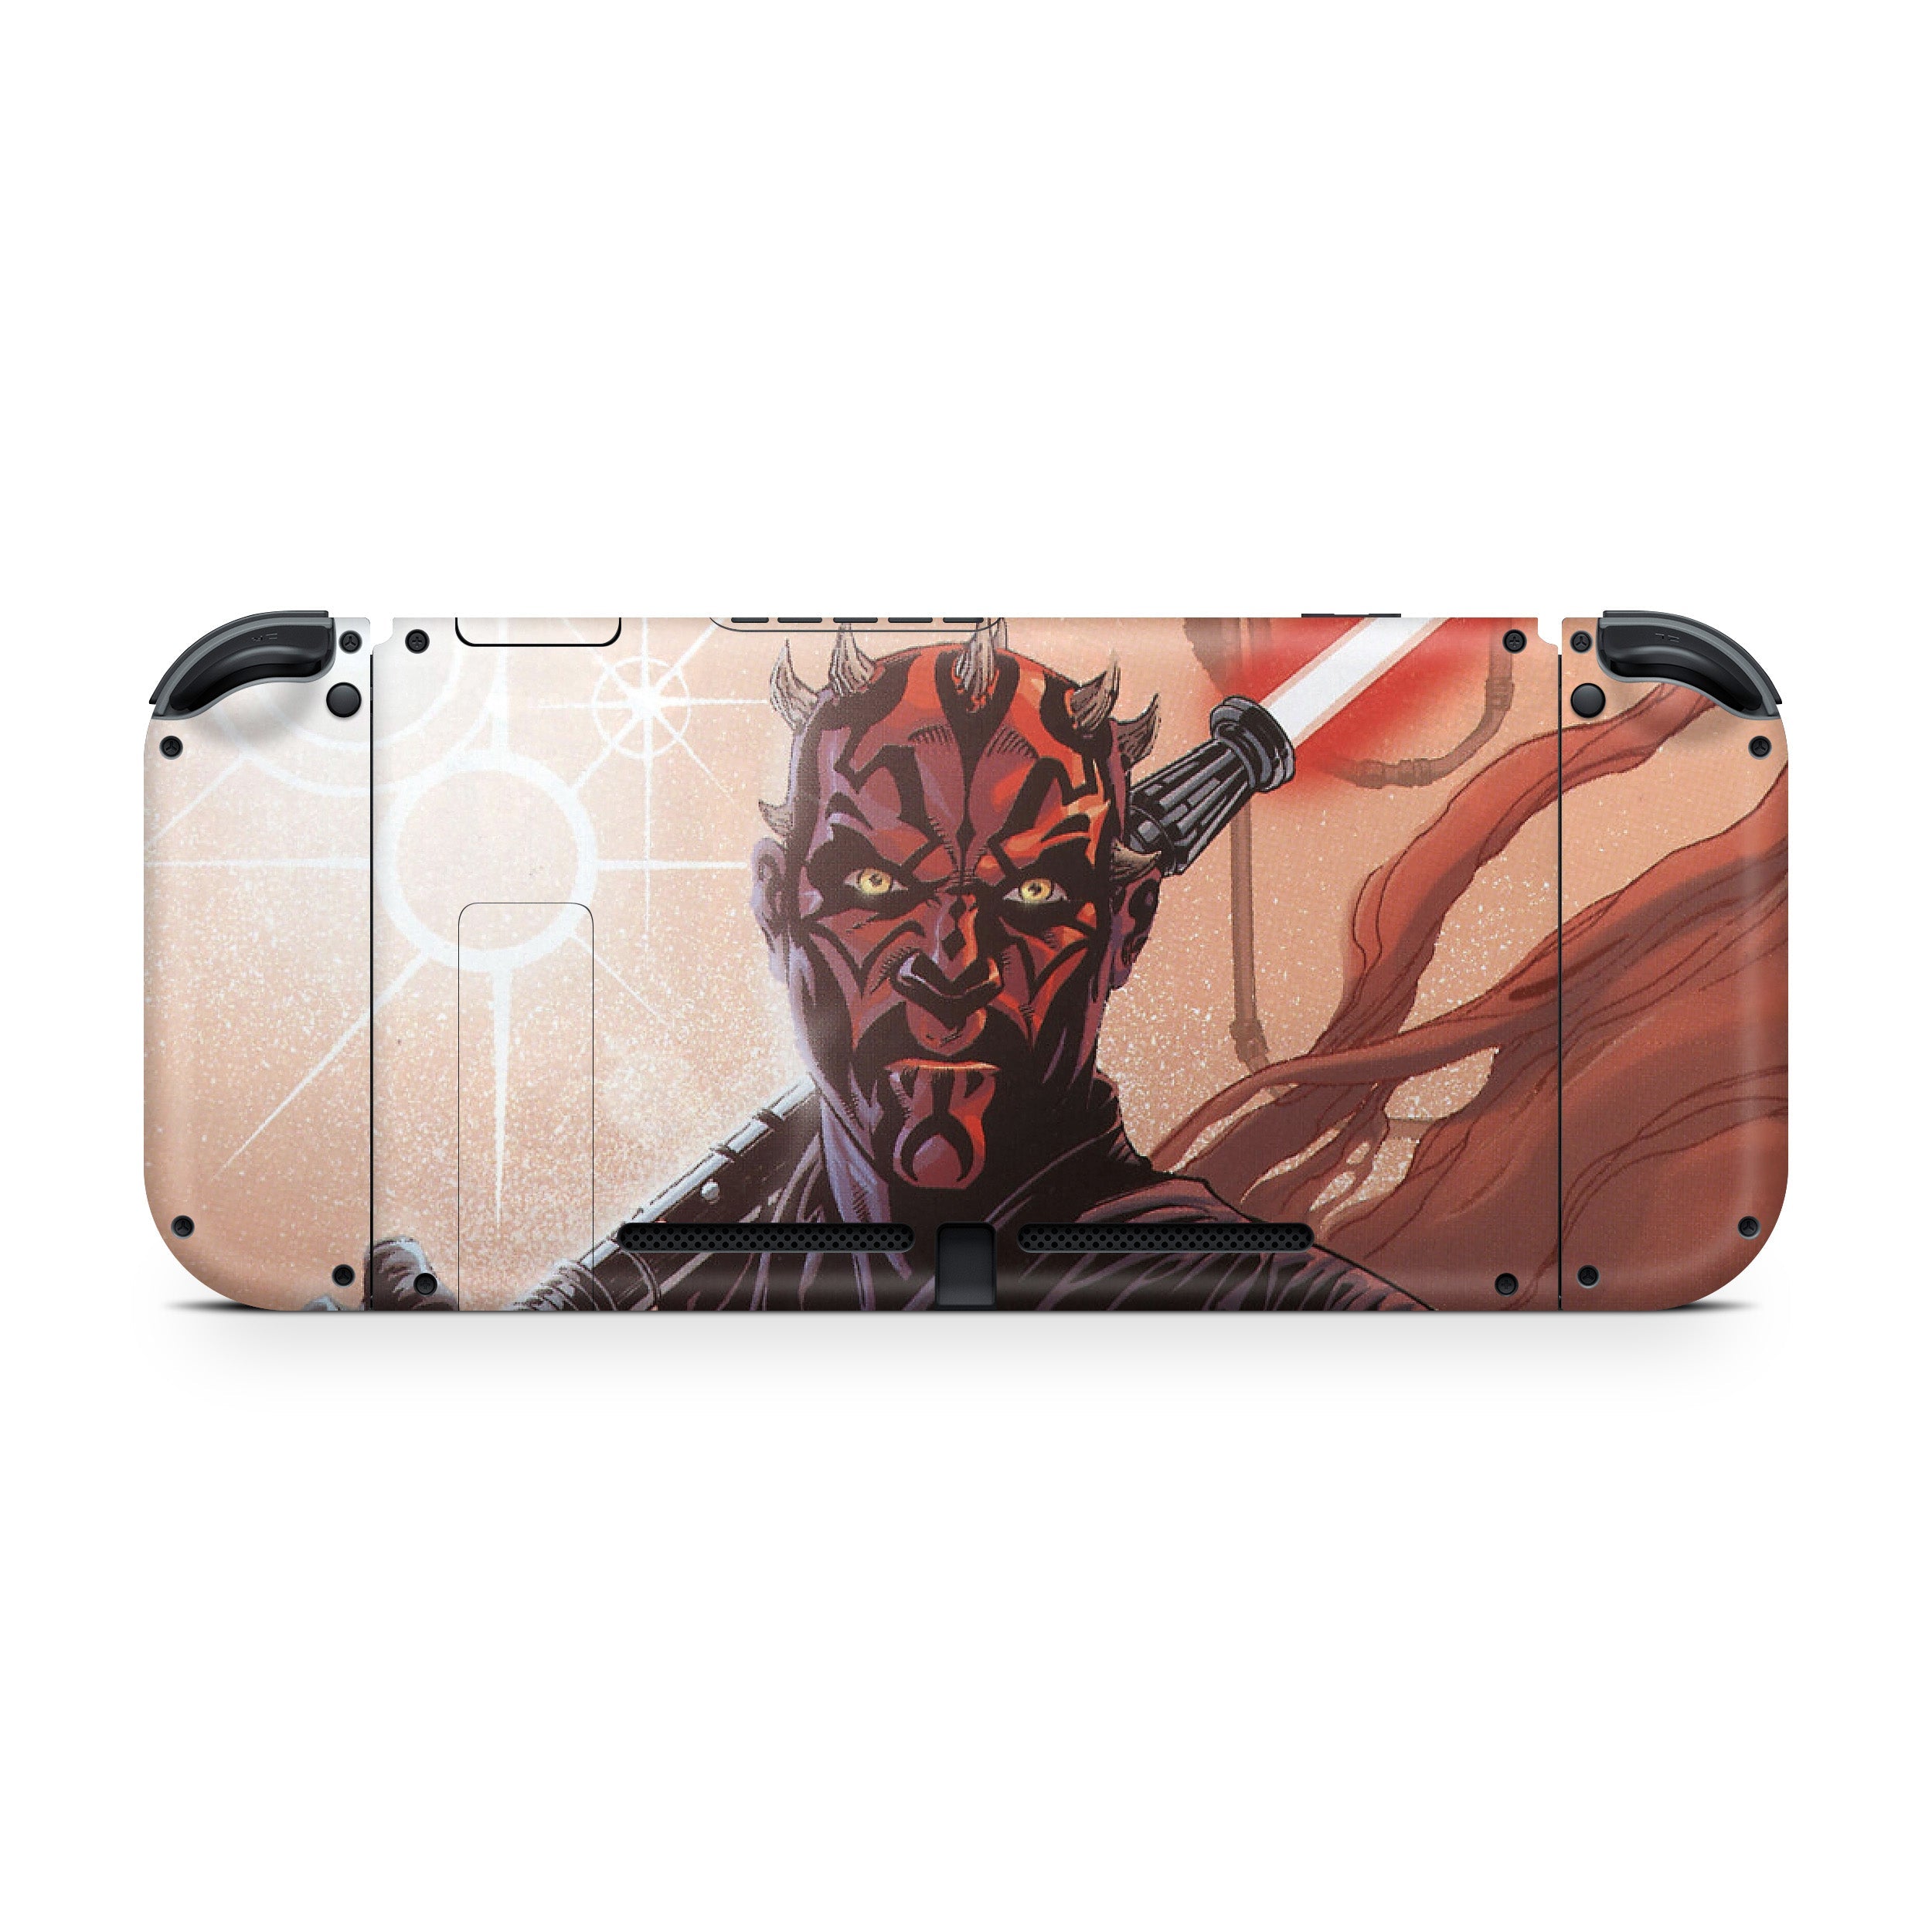 A video game skin featuring a Star Wars Darth Maul design for the Nintendo Switch.